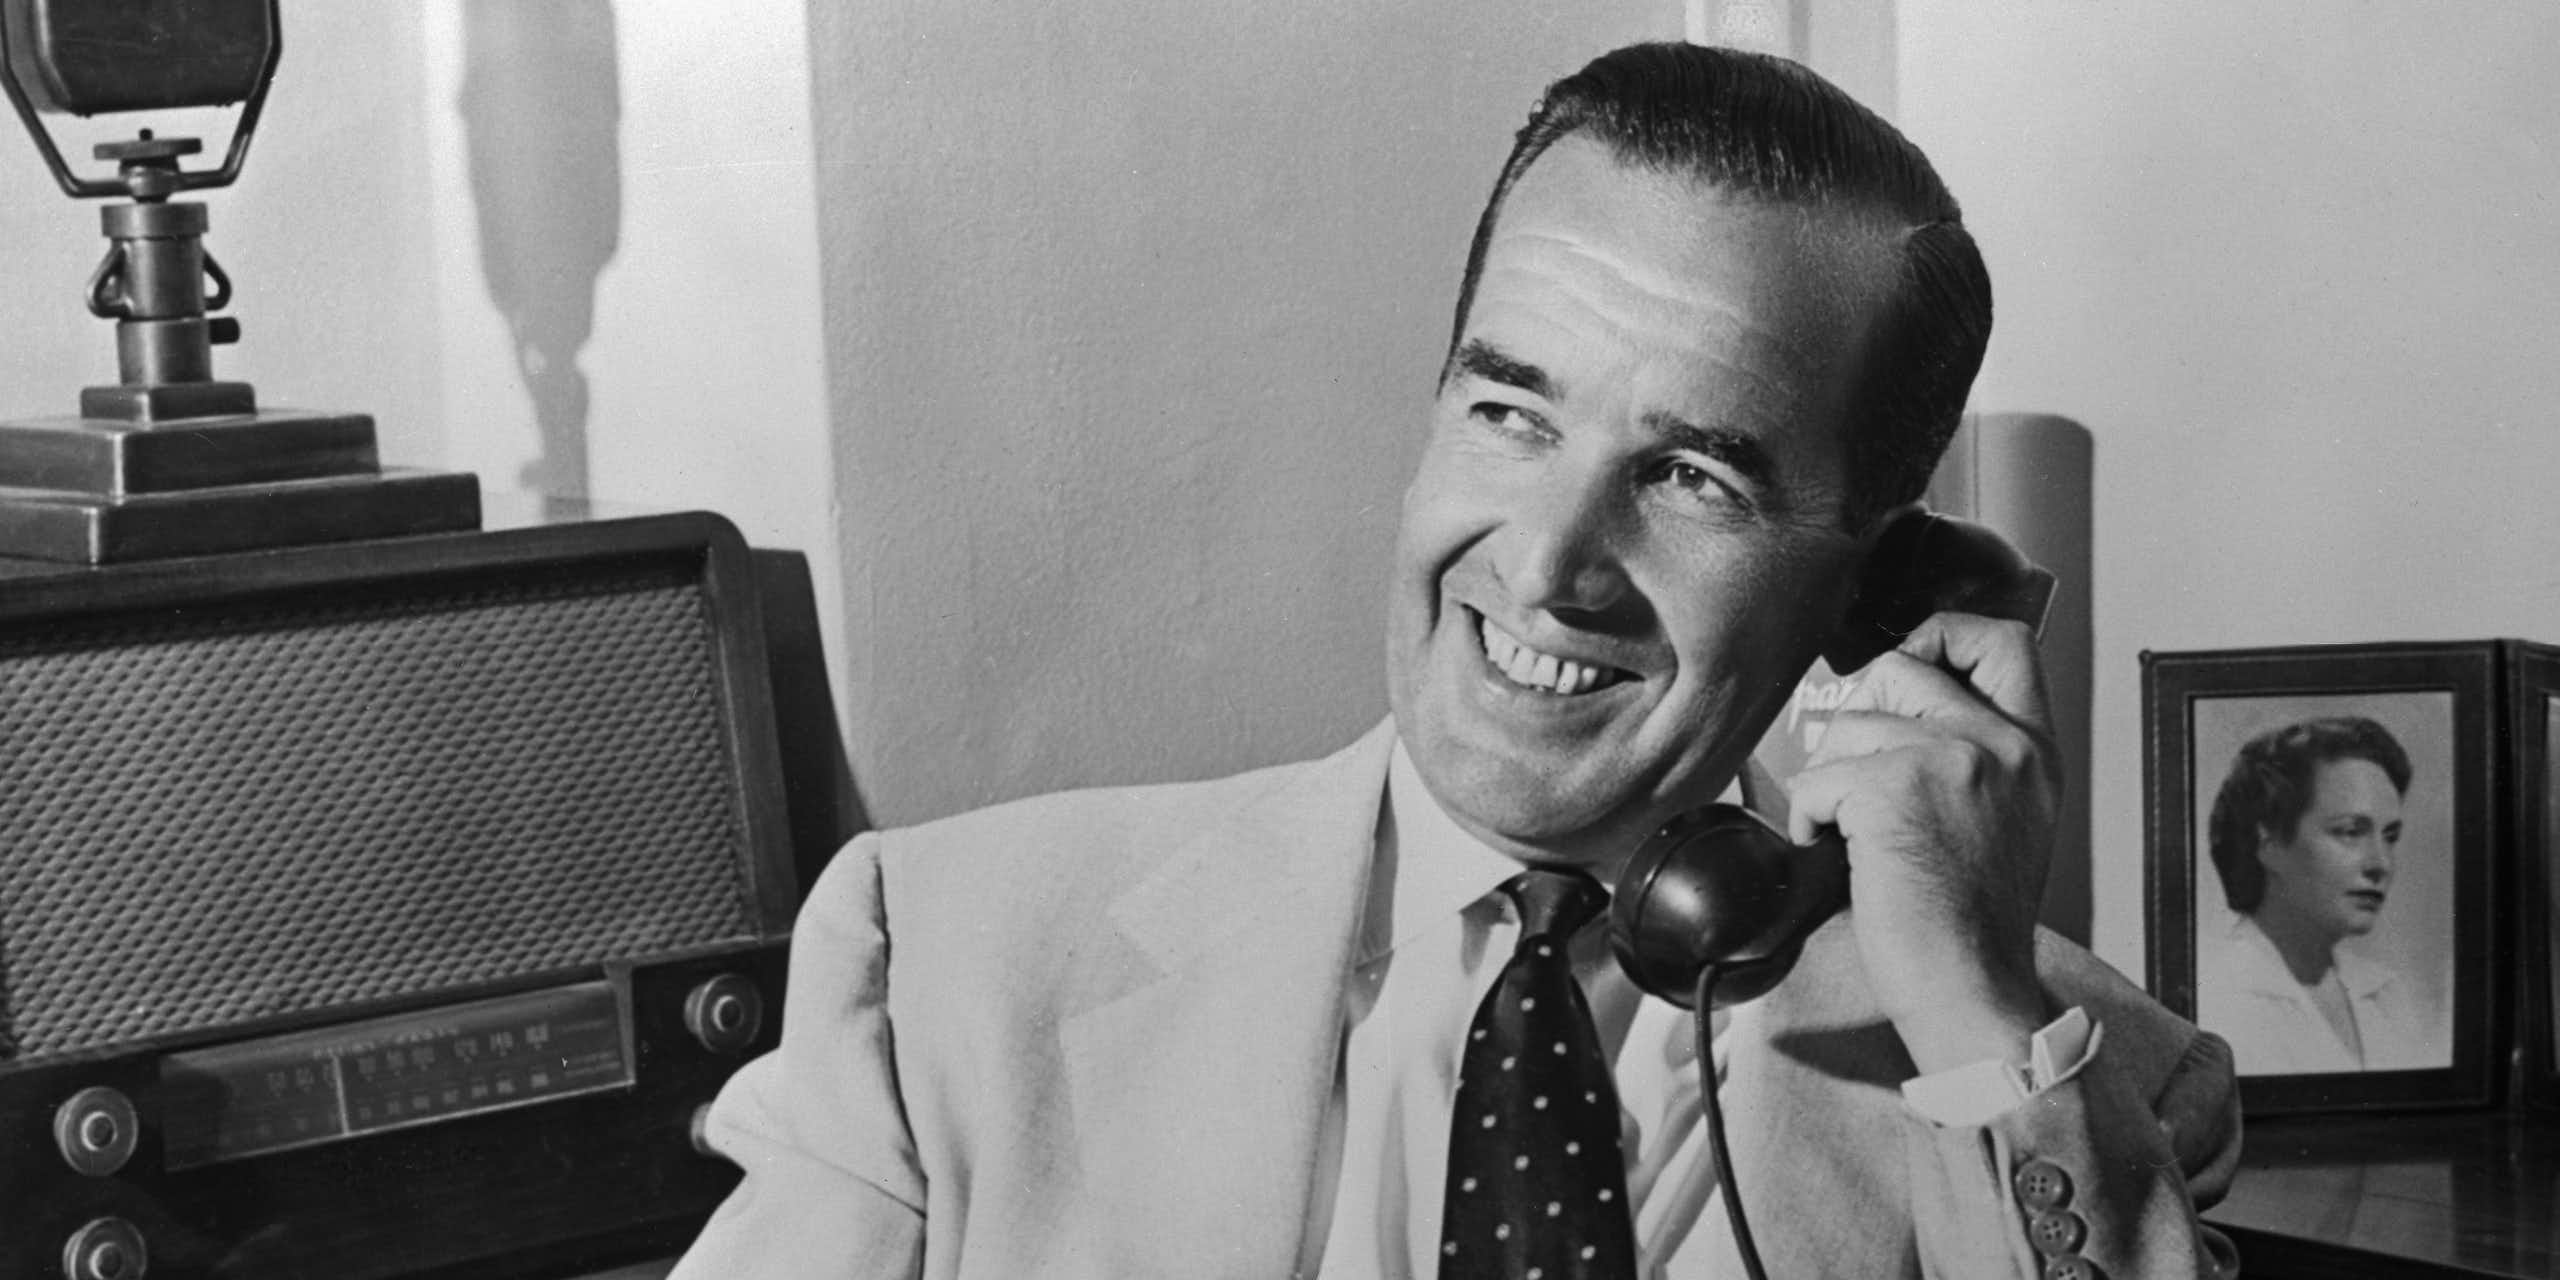 A smiling middle aged man is dressed in a lightly colored suit and is smiling as he talks on a telephone. 